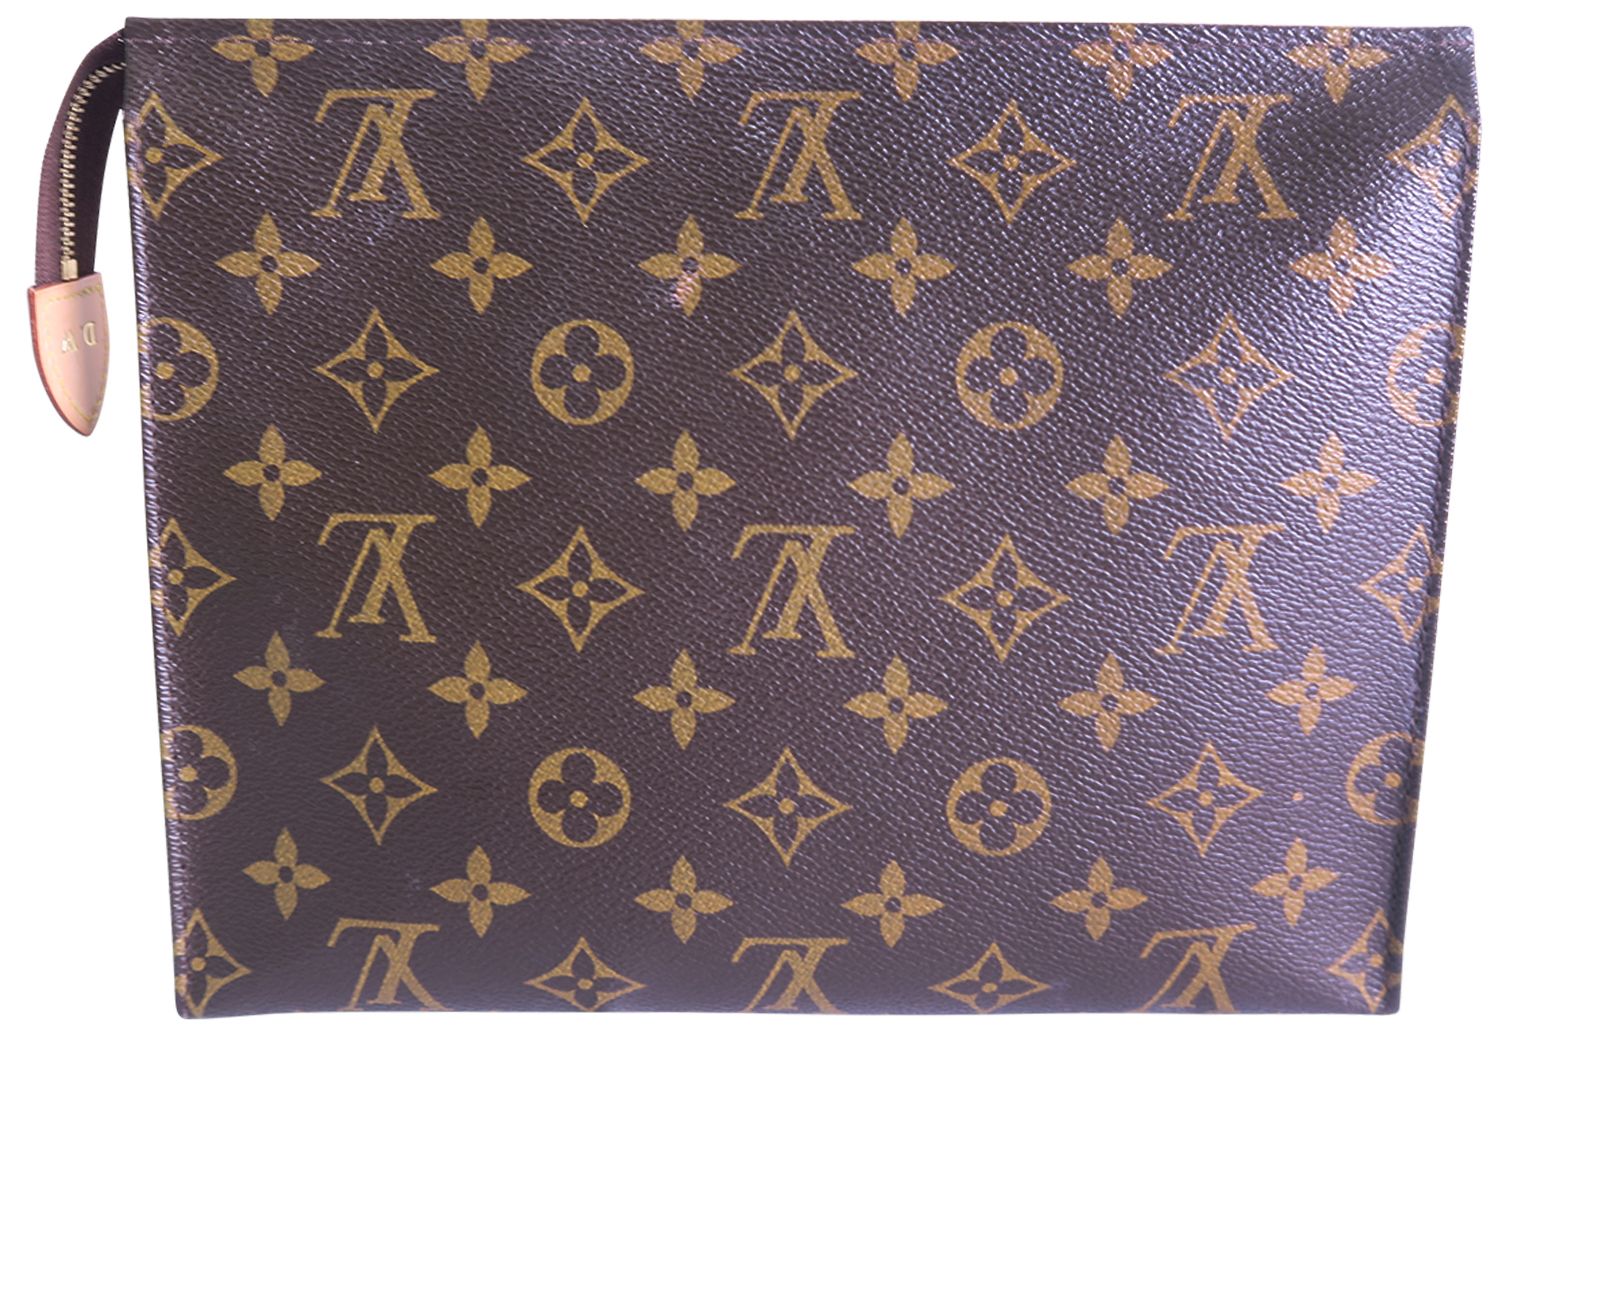 Louis+Vuitton+Toiletry+Pouch+19+Brown+Canvas+Monogram+Coated for